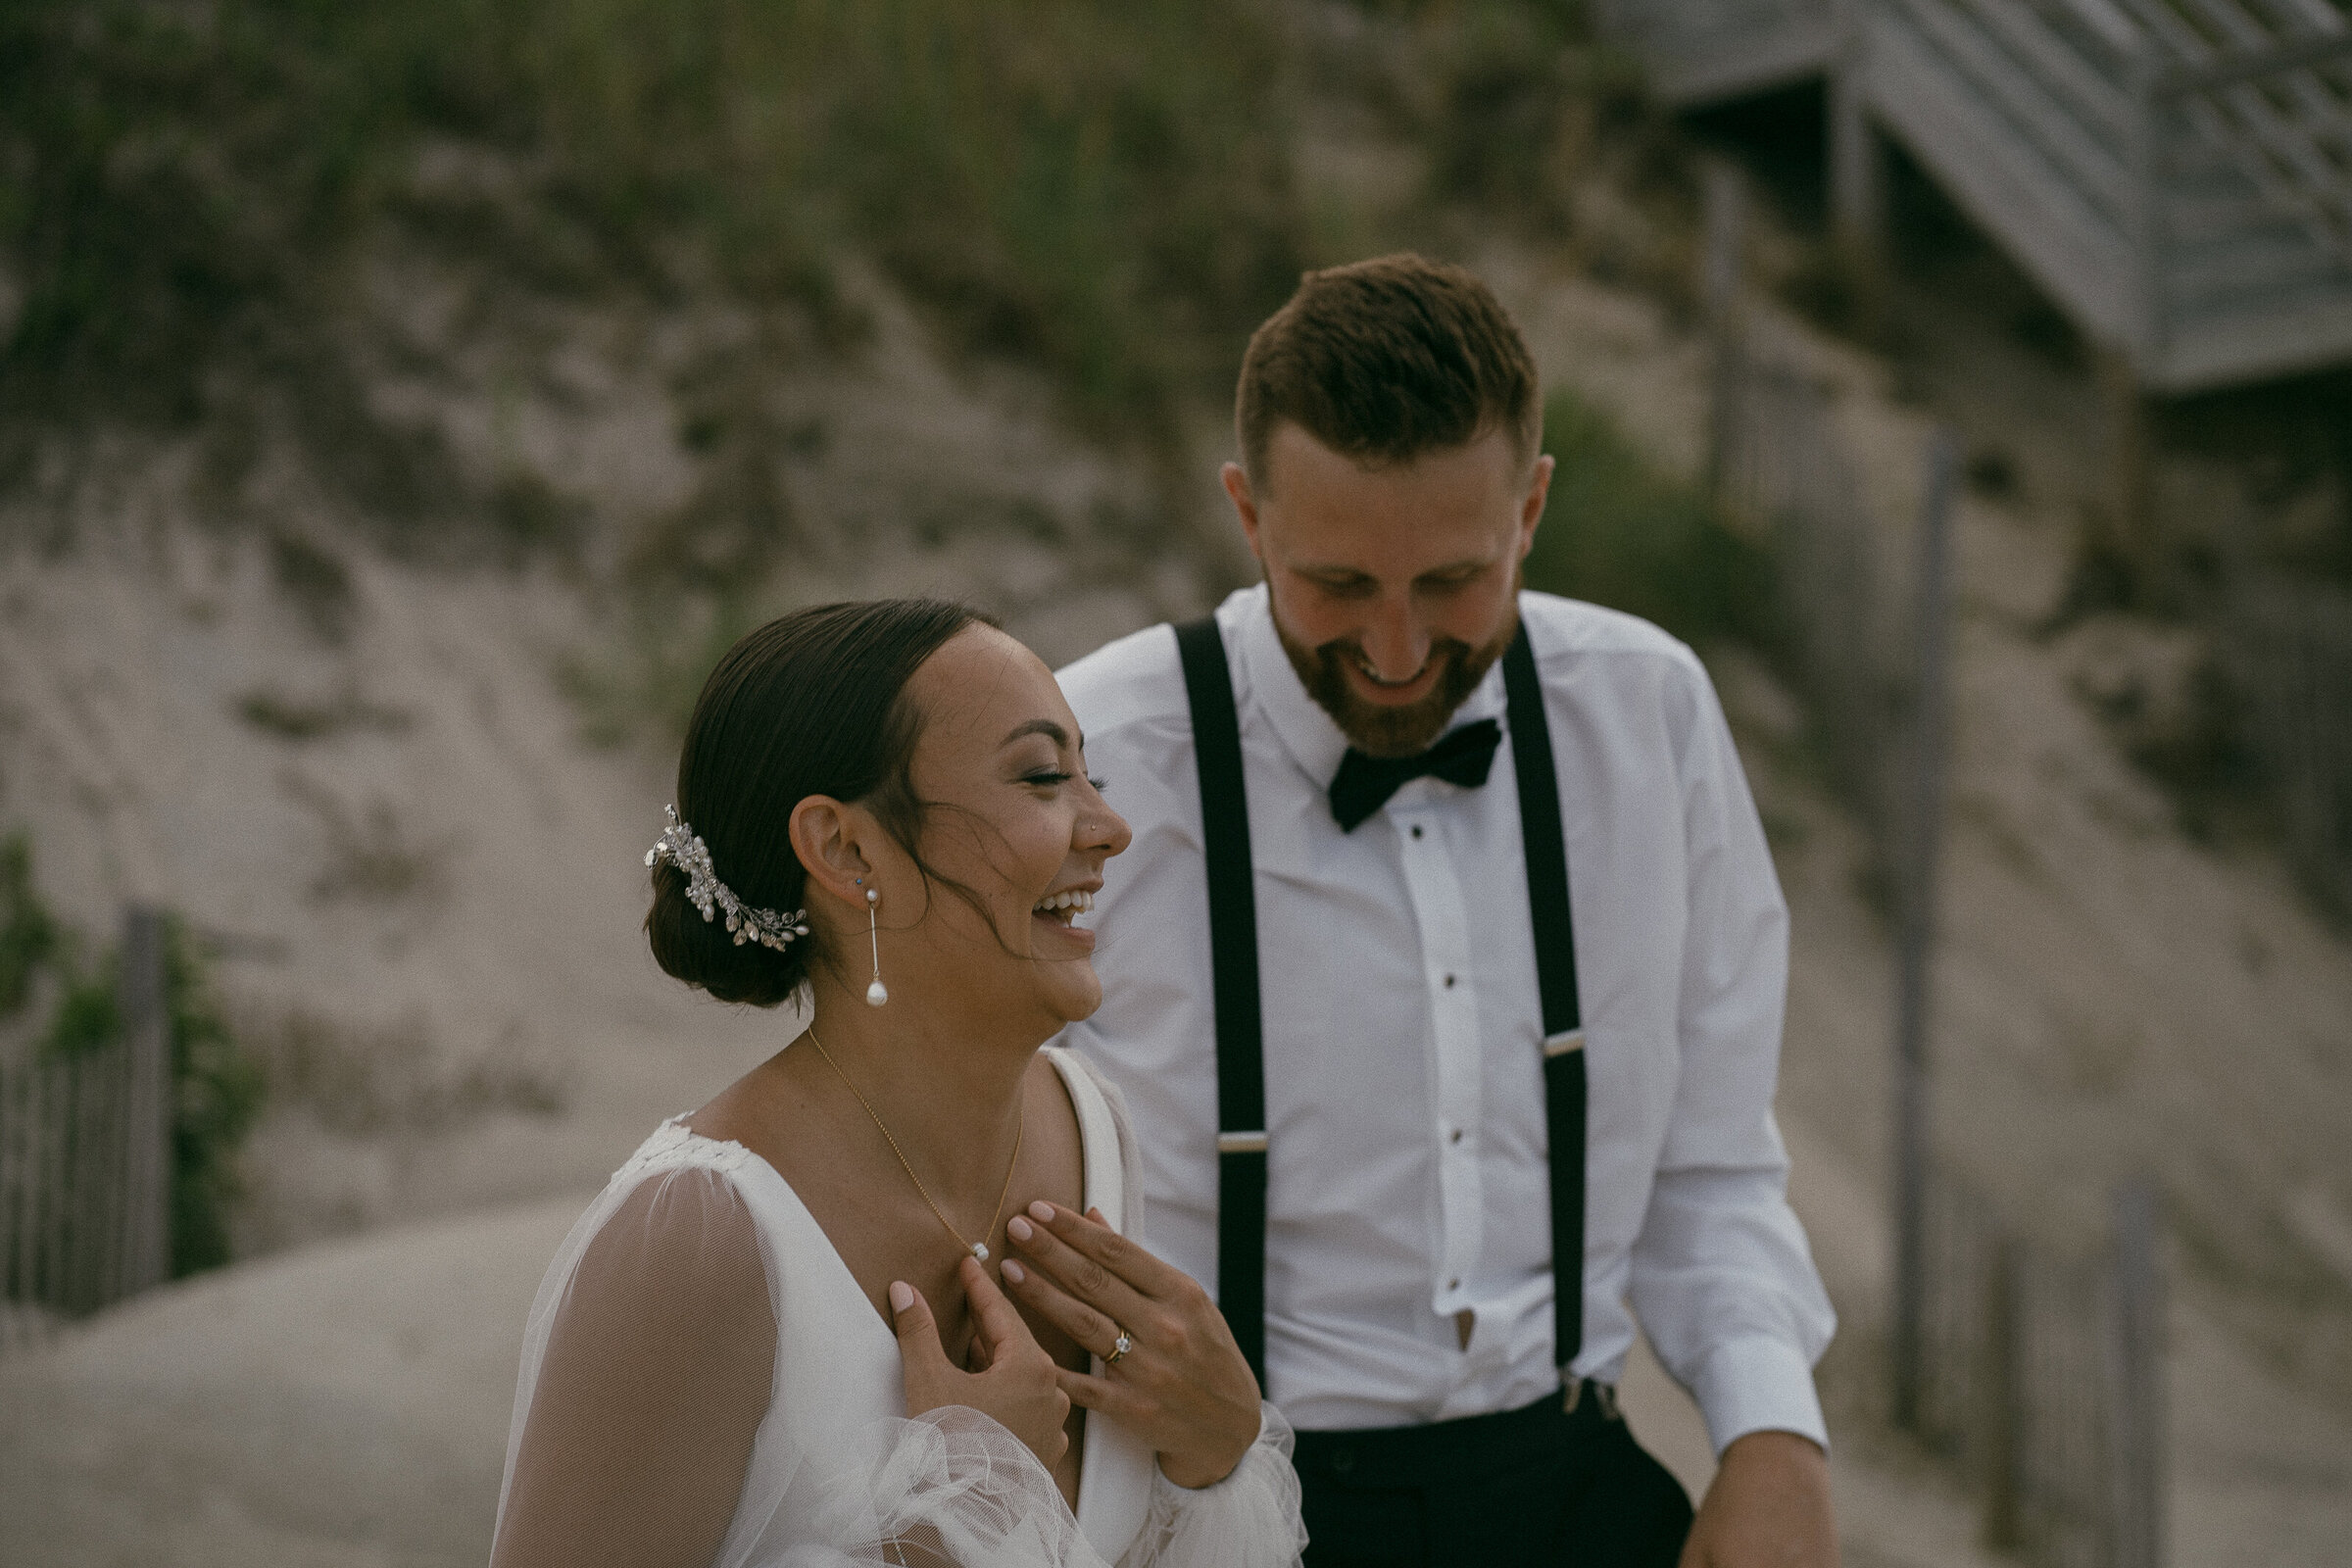 Bride and groom laughing together on a sandy beach.